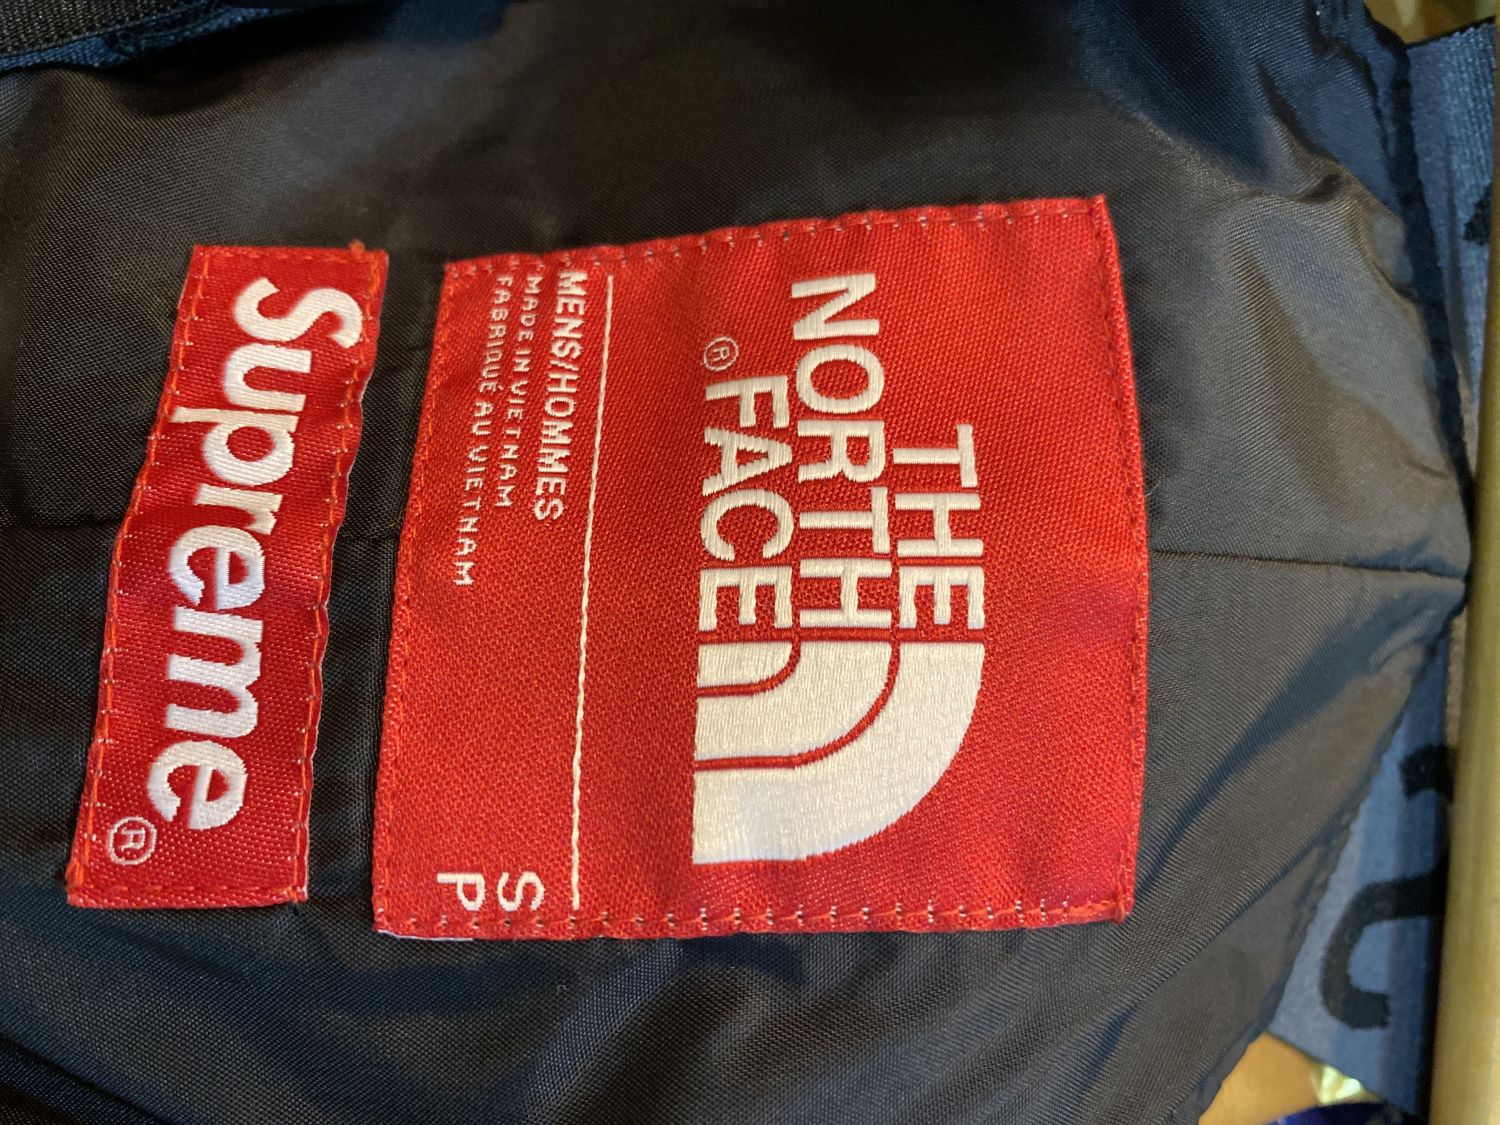 6935 - Supreme X The North Face Overall Jump Suit | Item Details ...